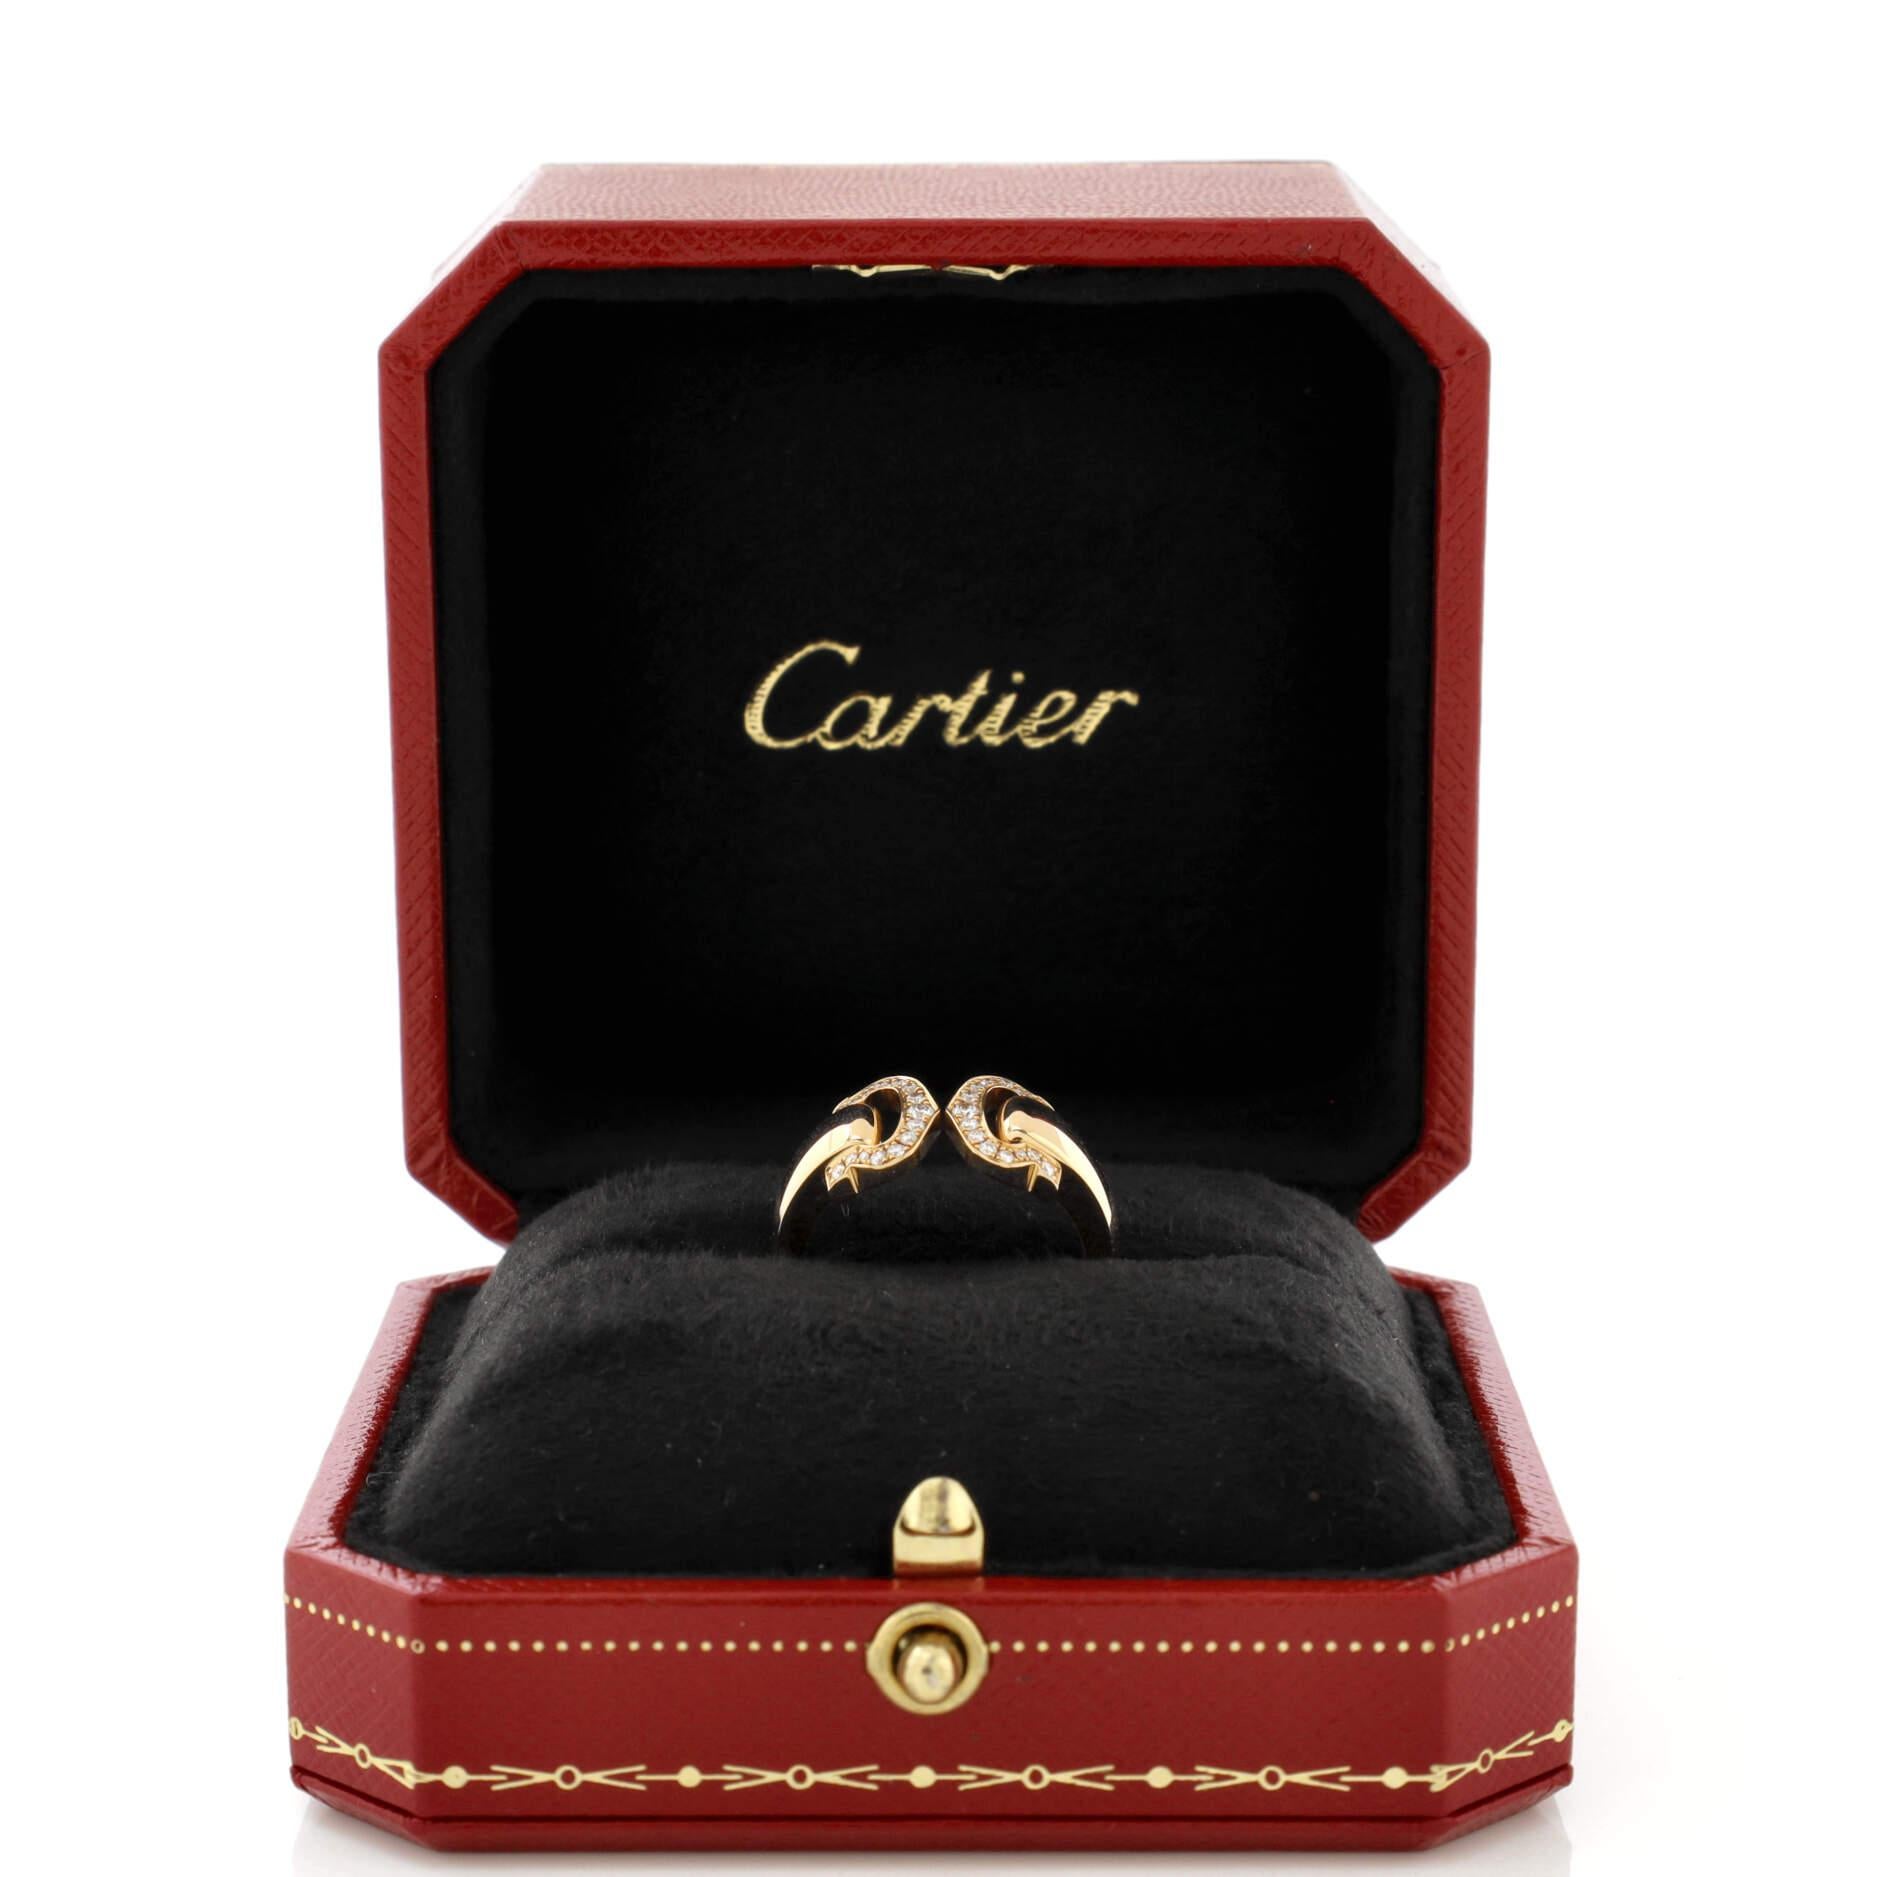 Condition: Great. Minor wear throughout.
Accessories:
Measurements: Size: 7.25 - 55, Width: 4.95 mm
Designer: Cartier
Model: Vintage C de Cartier Ring 18K Yellow Gold with Diamonds
Exterior Color: Yellow Gold
Item Number: 225855/10